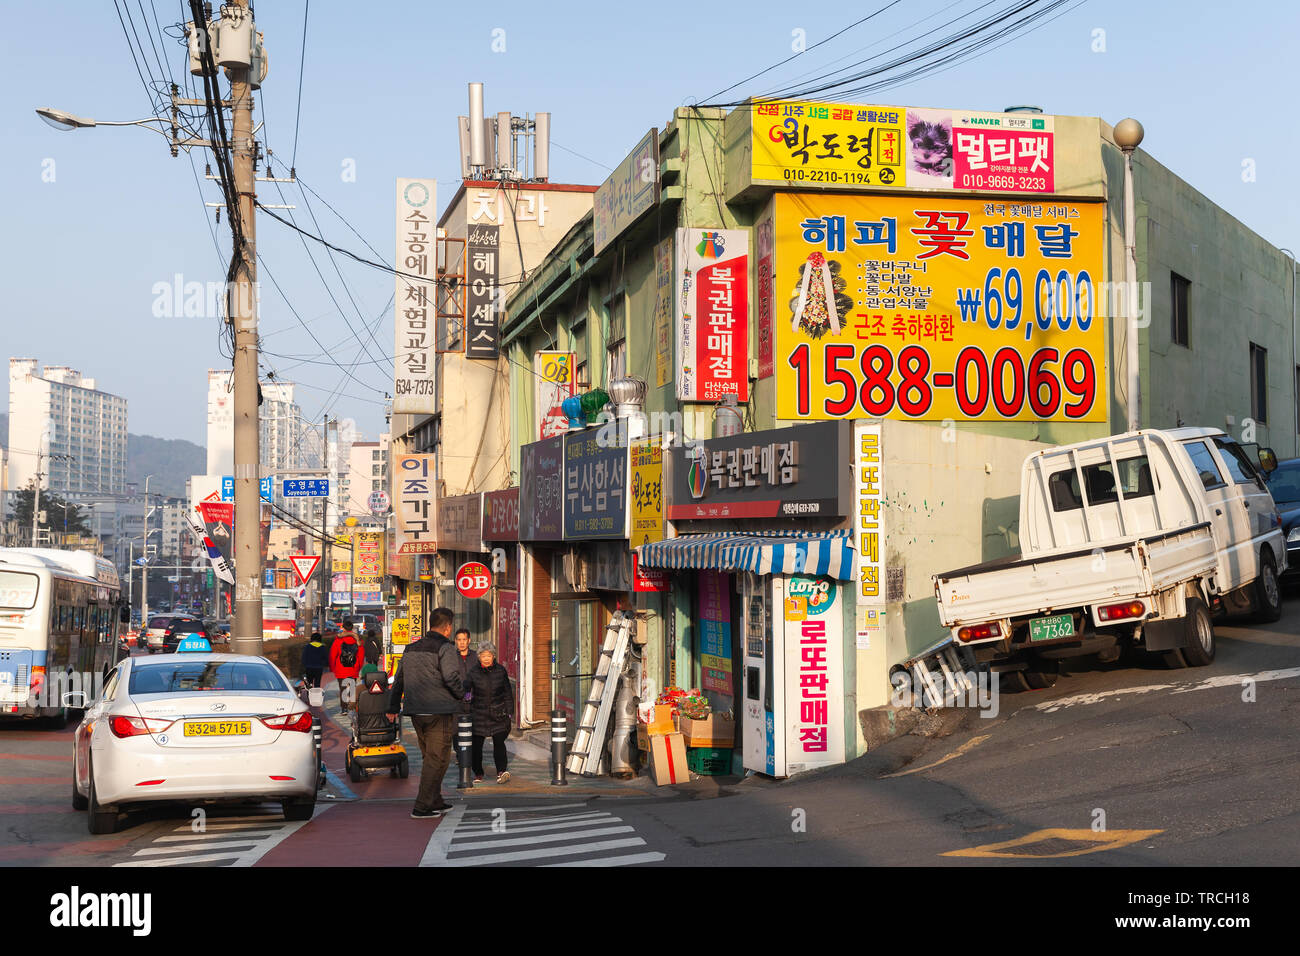 Busan, South Korea - March 12, 2018: Busan city, street view with markets, cars and walking people Stock Photo